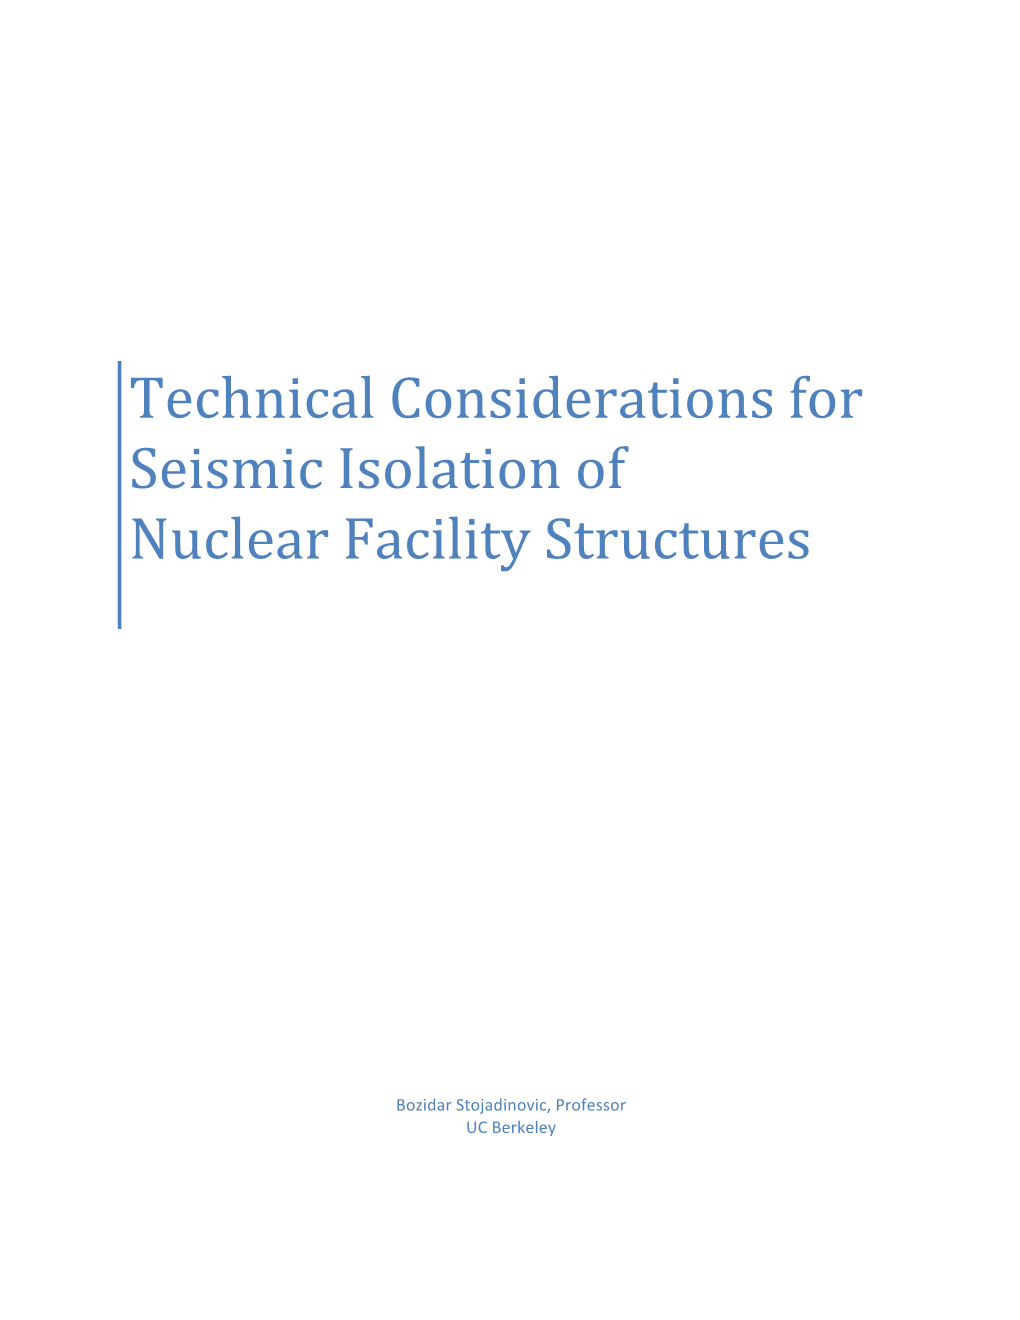 Technical Considerations for Seismic Isolation of Nuclear Facility Structures